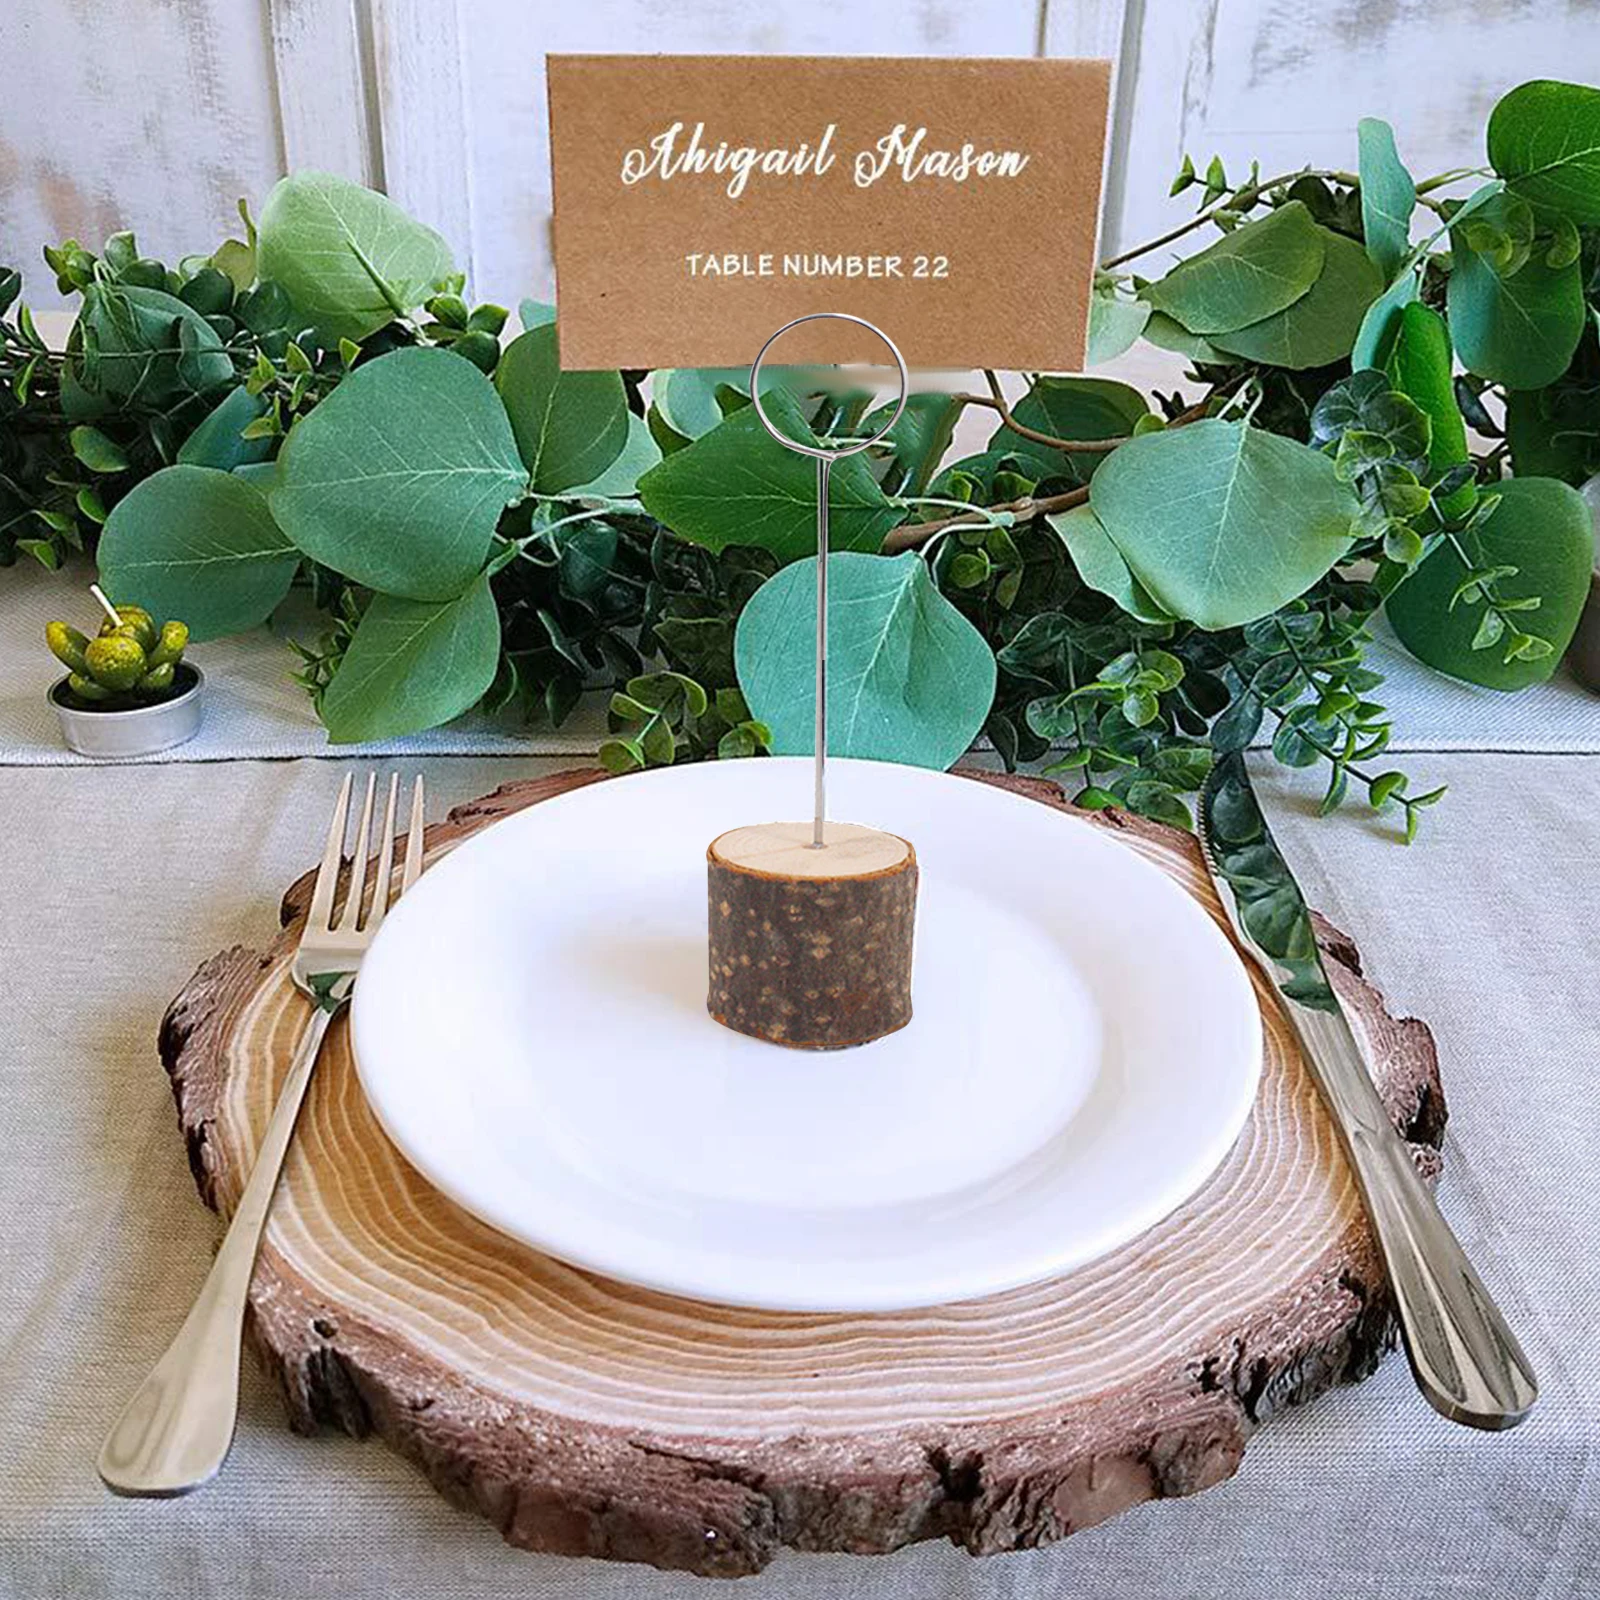 20pcs Rustic Wooden Place Card Holder Party Wedding Table Name Card Holder 